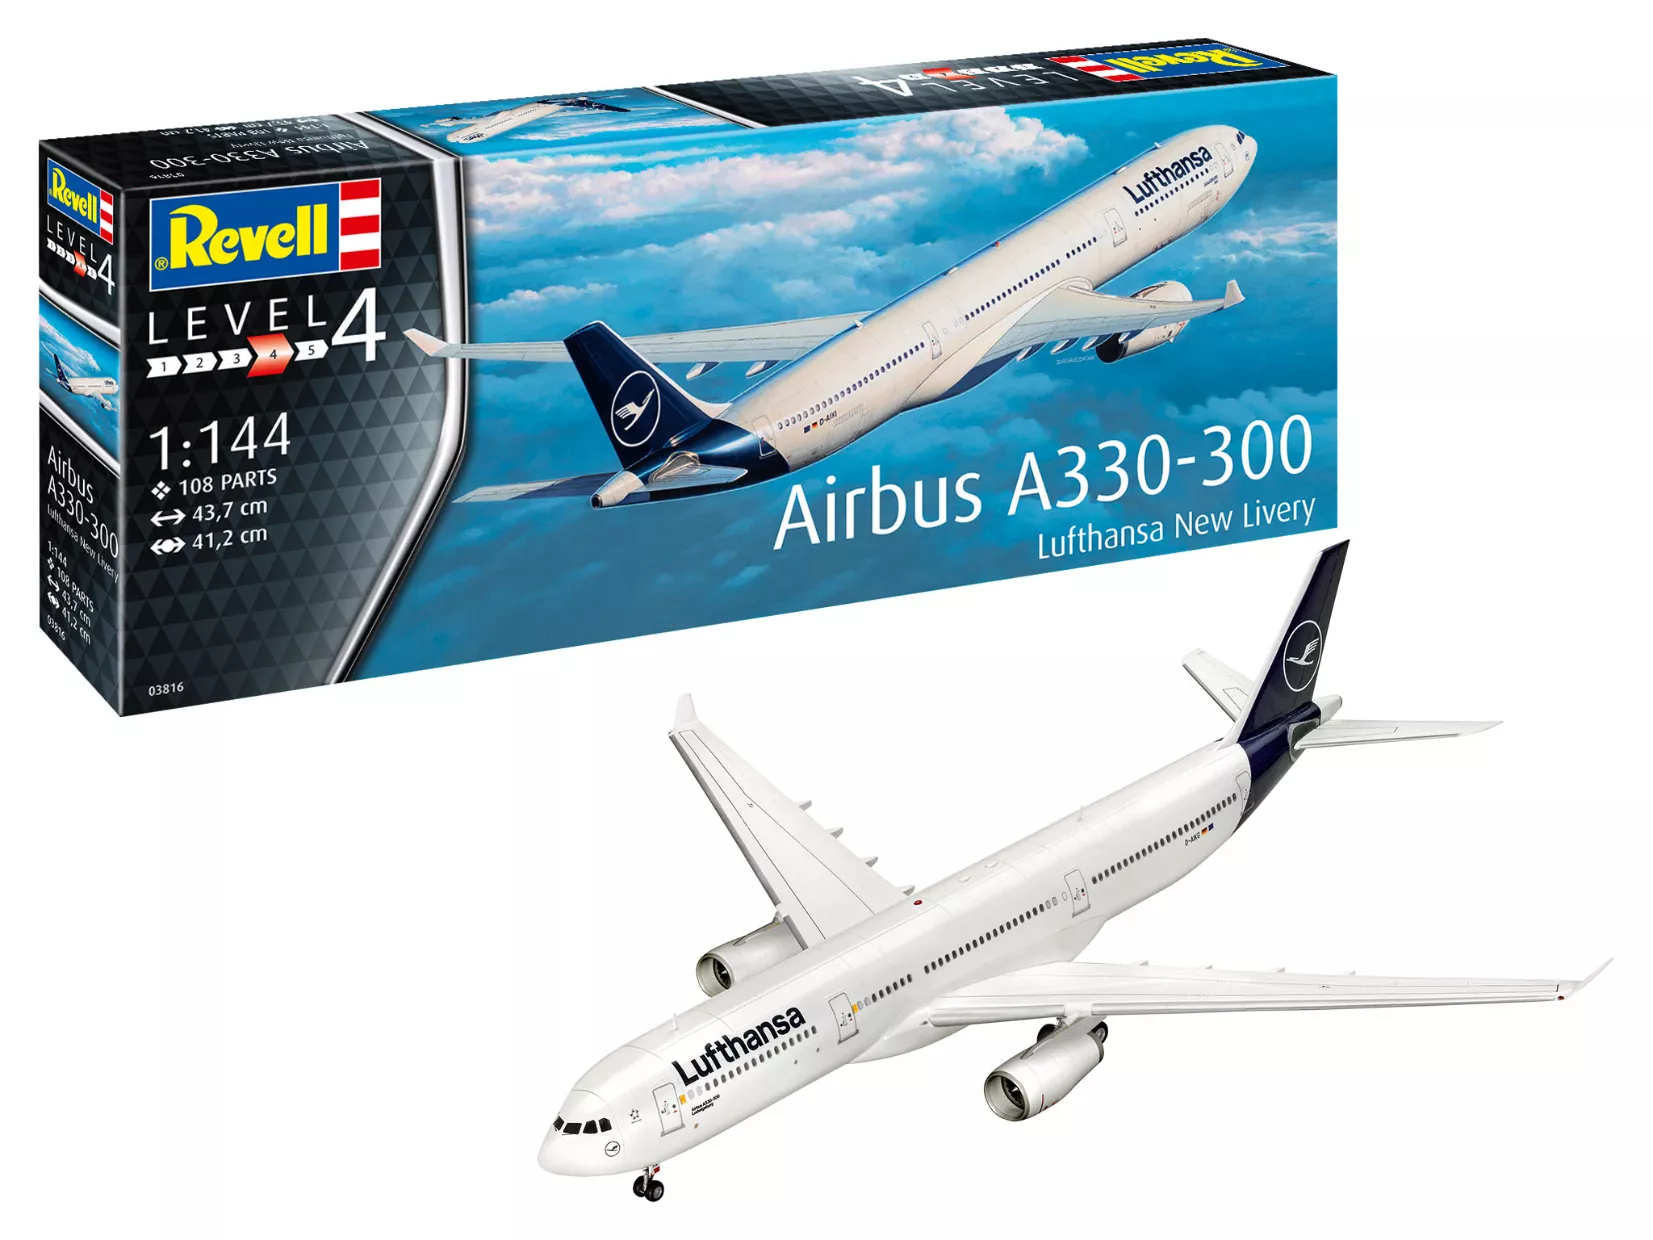 Revell 03816 Airbus A330-300 - Lufthansa New Livery Flugzeuge 1:144